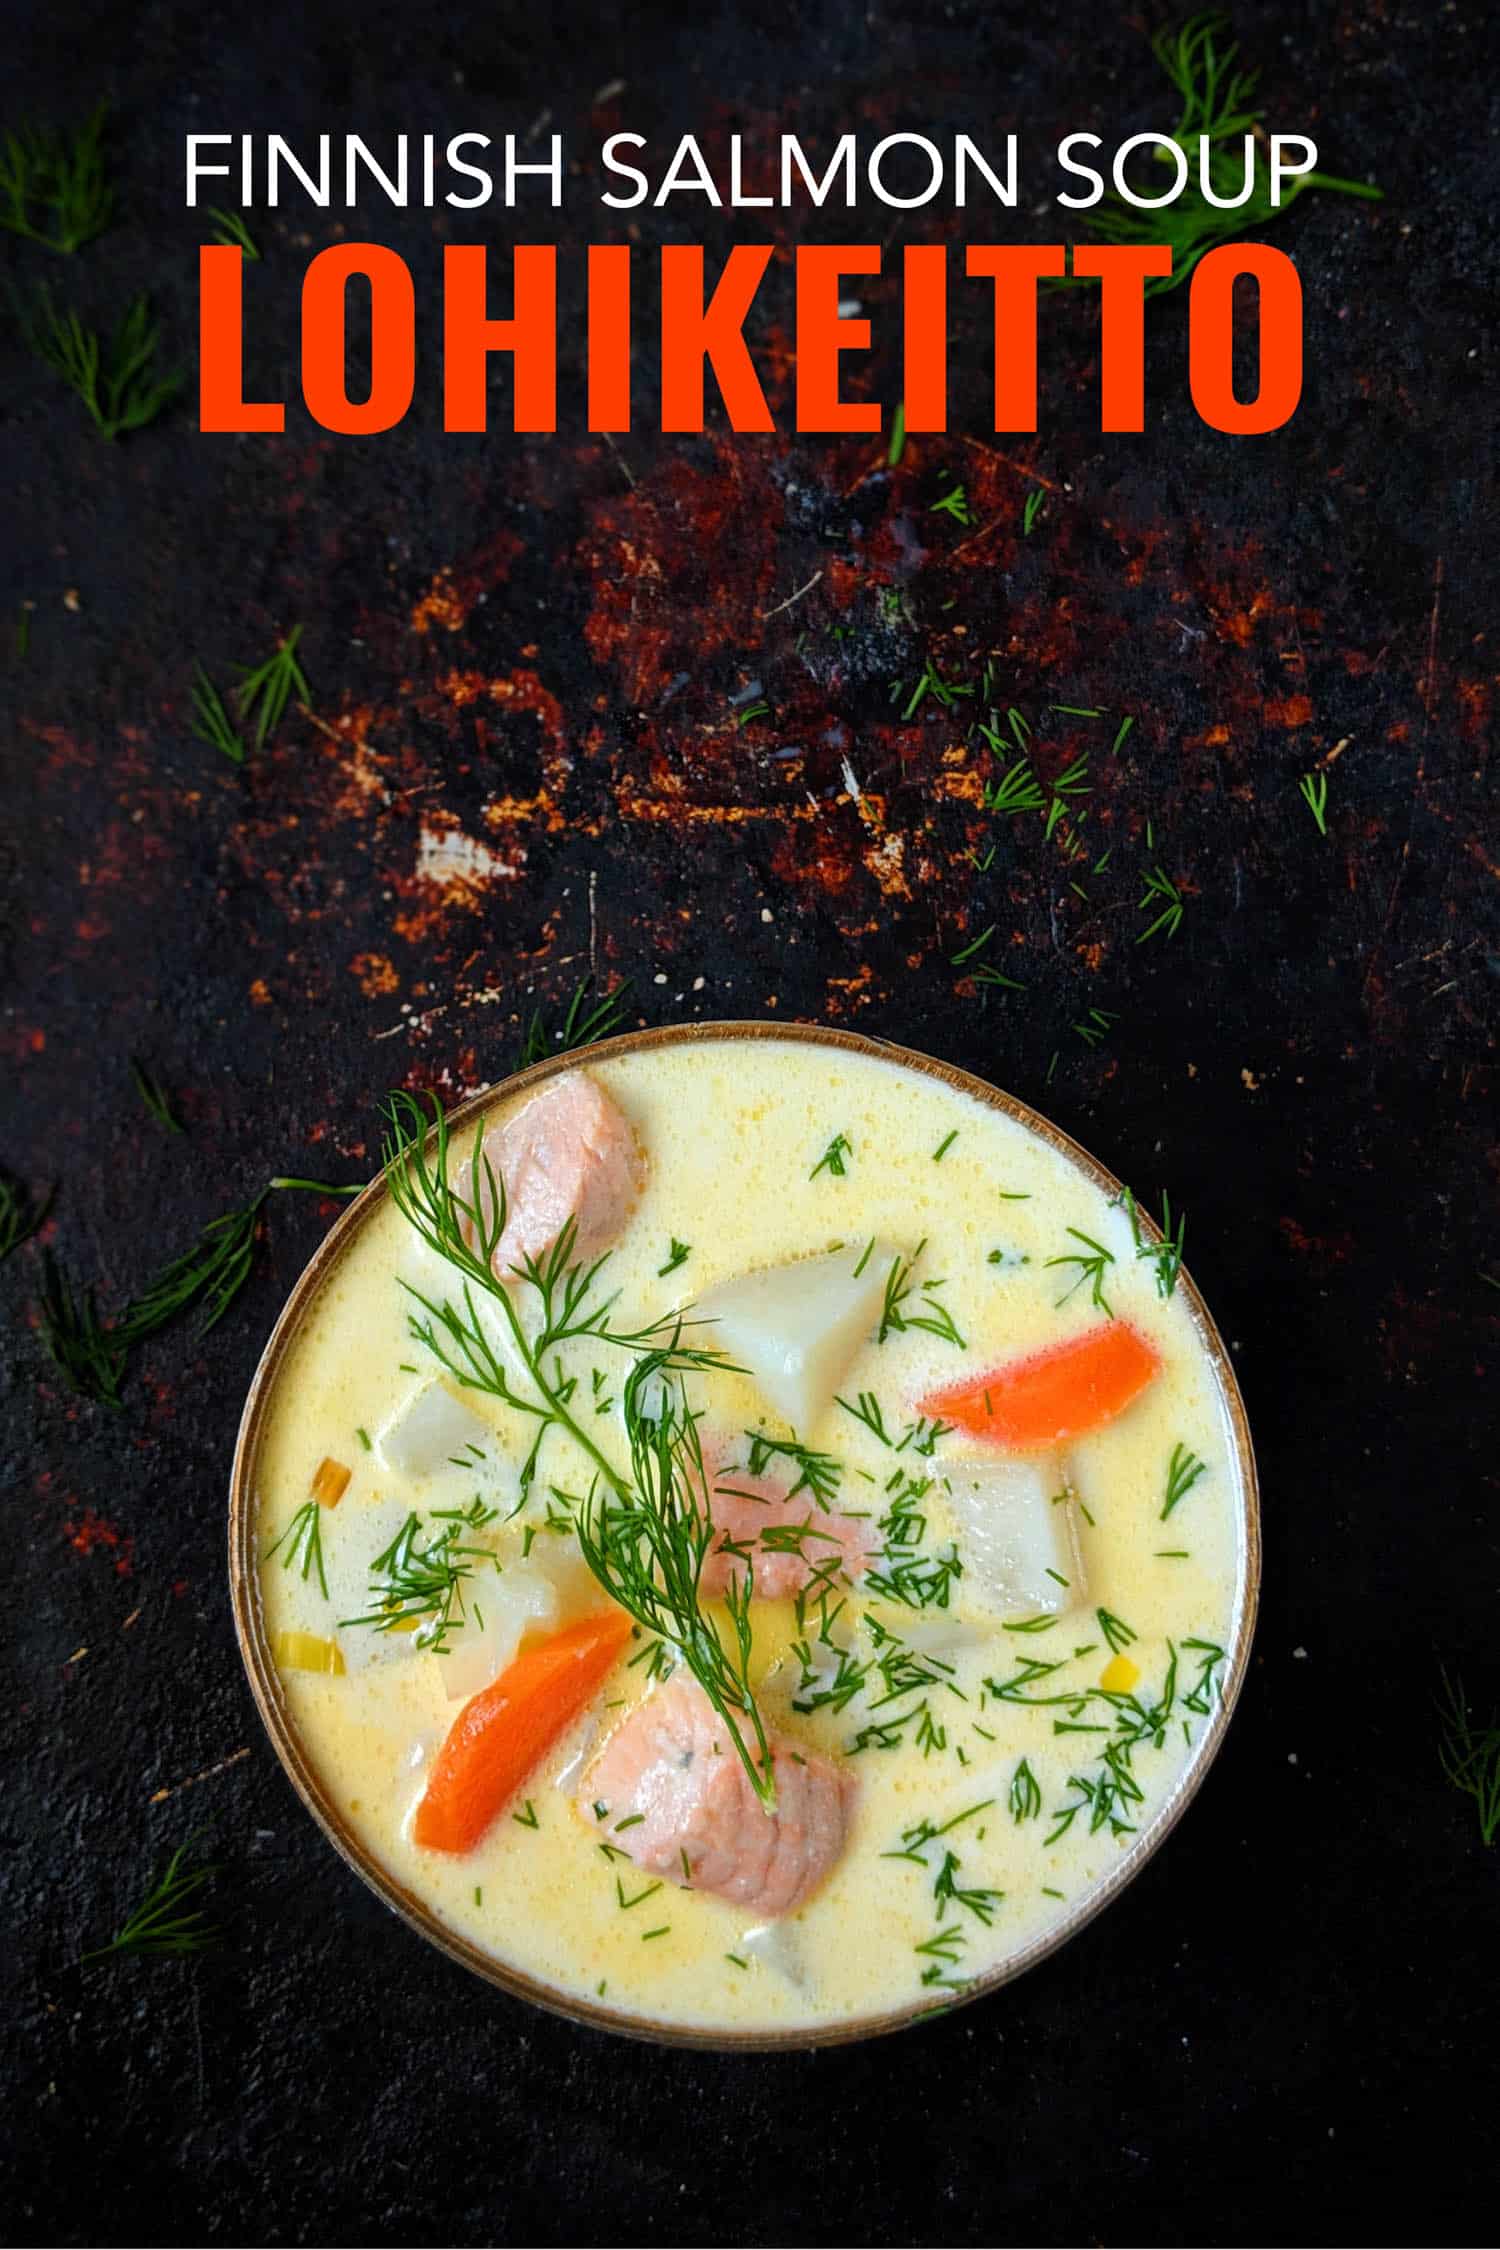 Lohikeitto is a creamy Finnish salmon soup, this recipe is unbelievably easy to make.